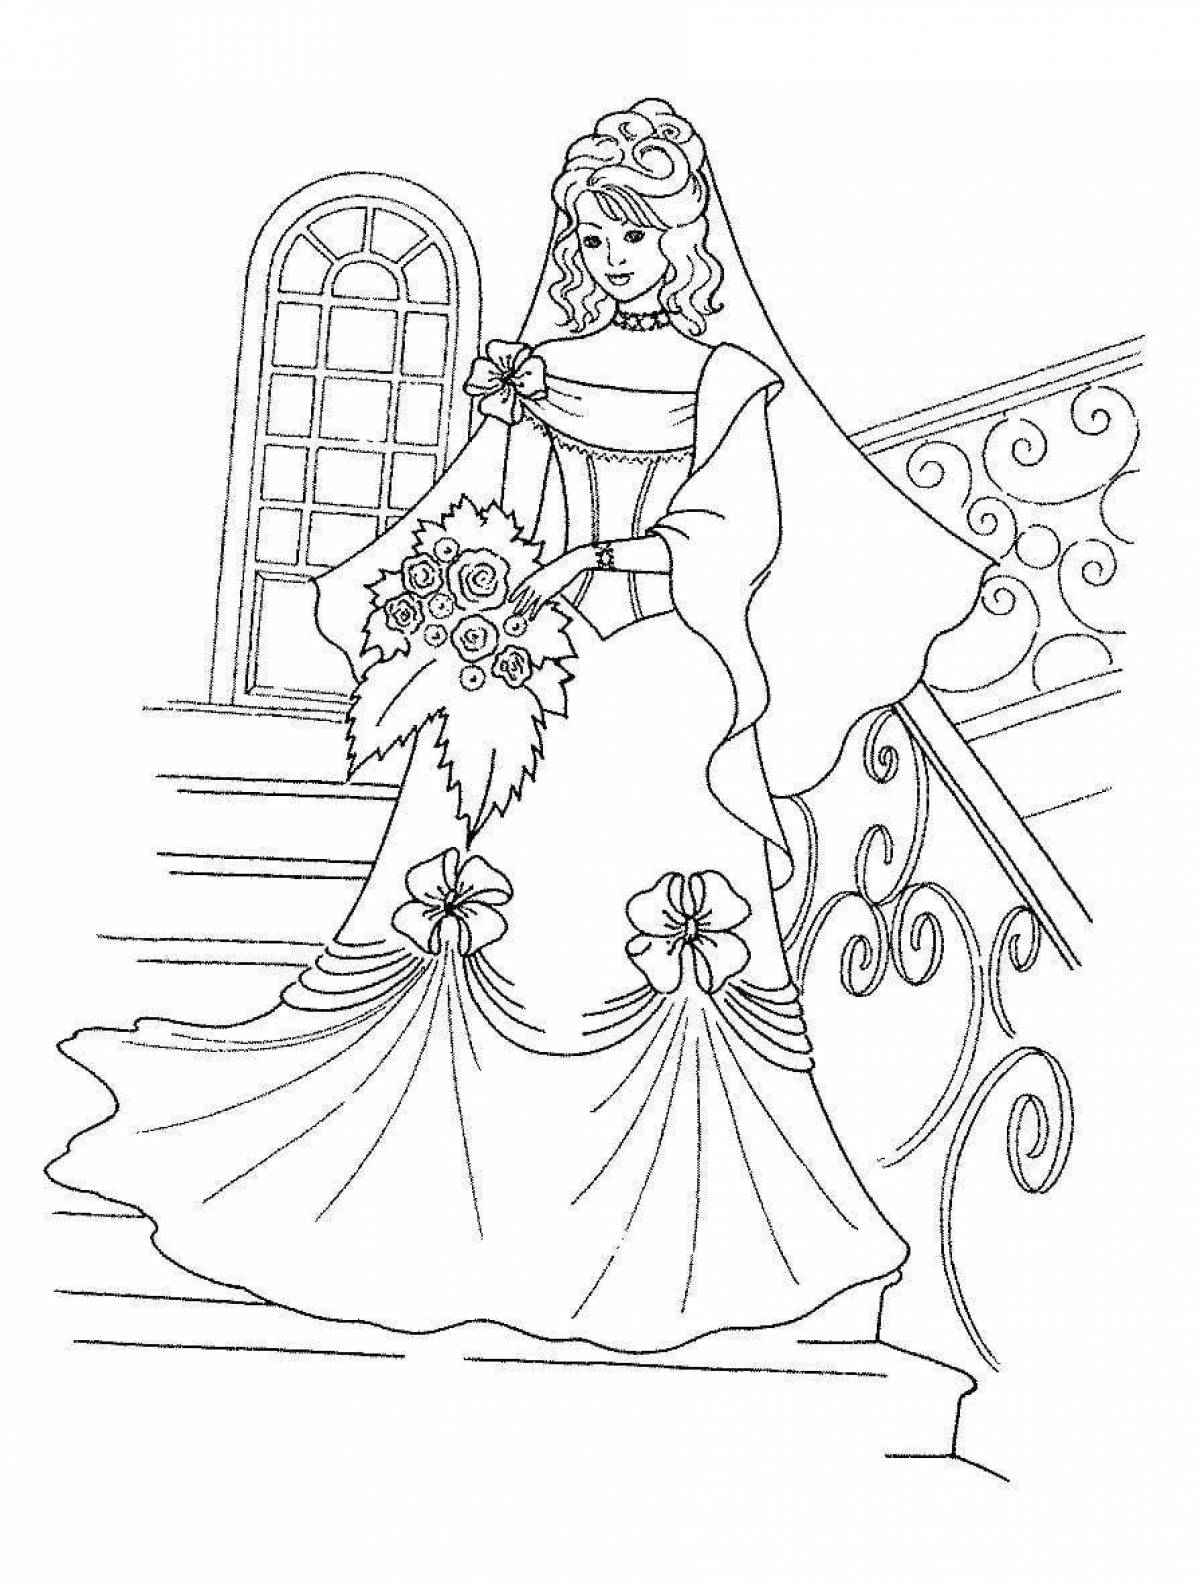 Glitter coloring book for girls princesses in pretty dresses